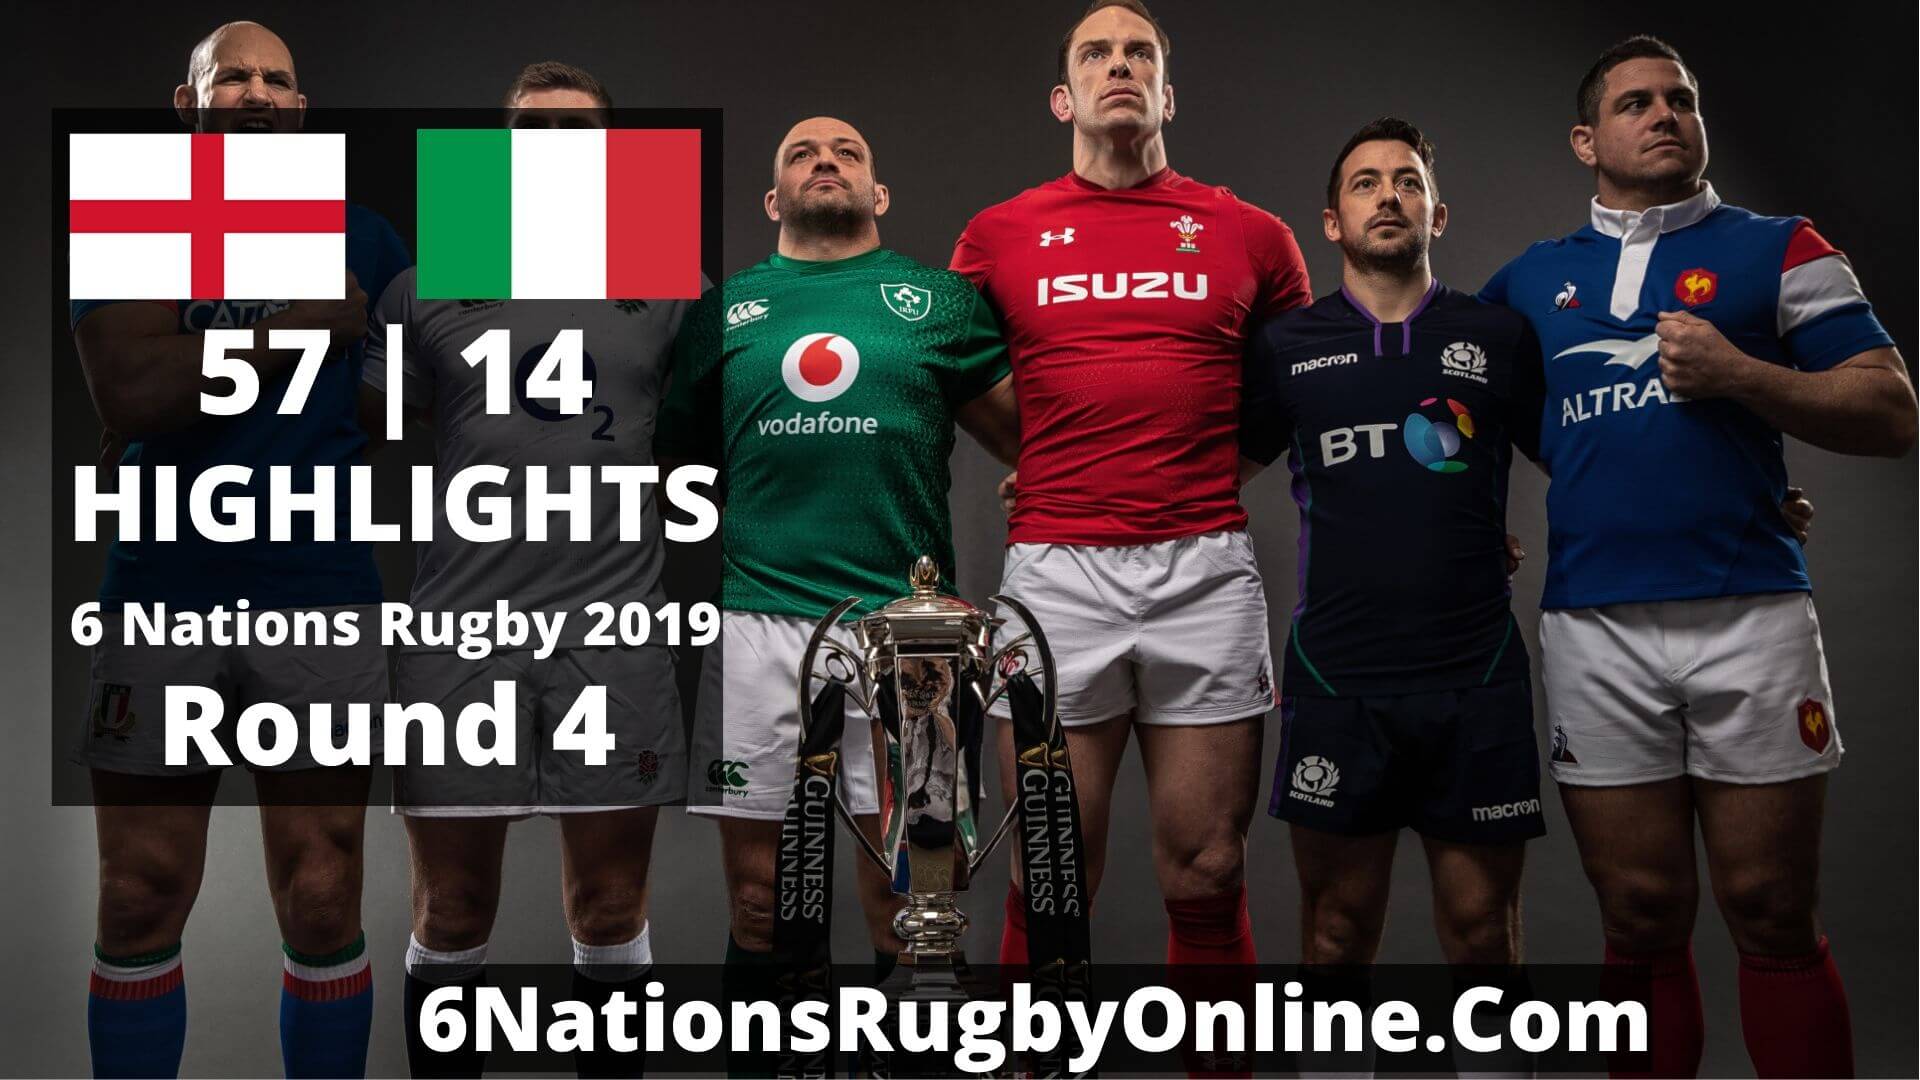 England Vs Italy Highlights 2019 Six Nations Rugby Round 4